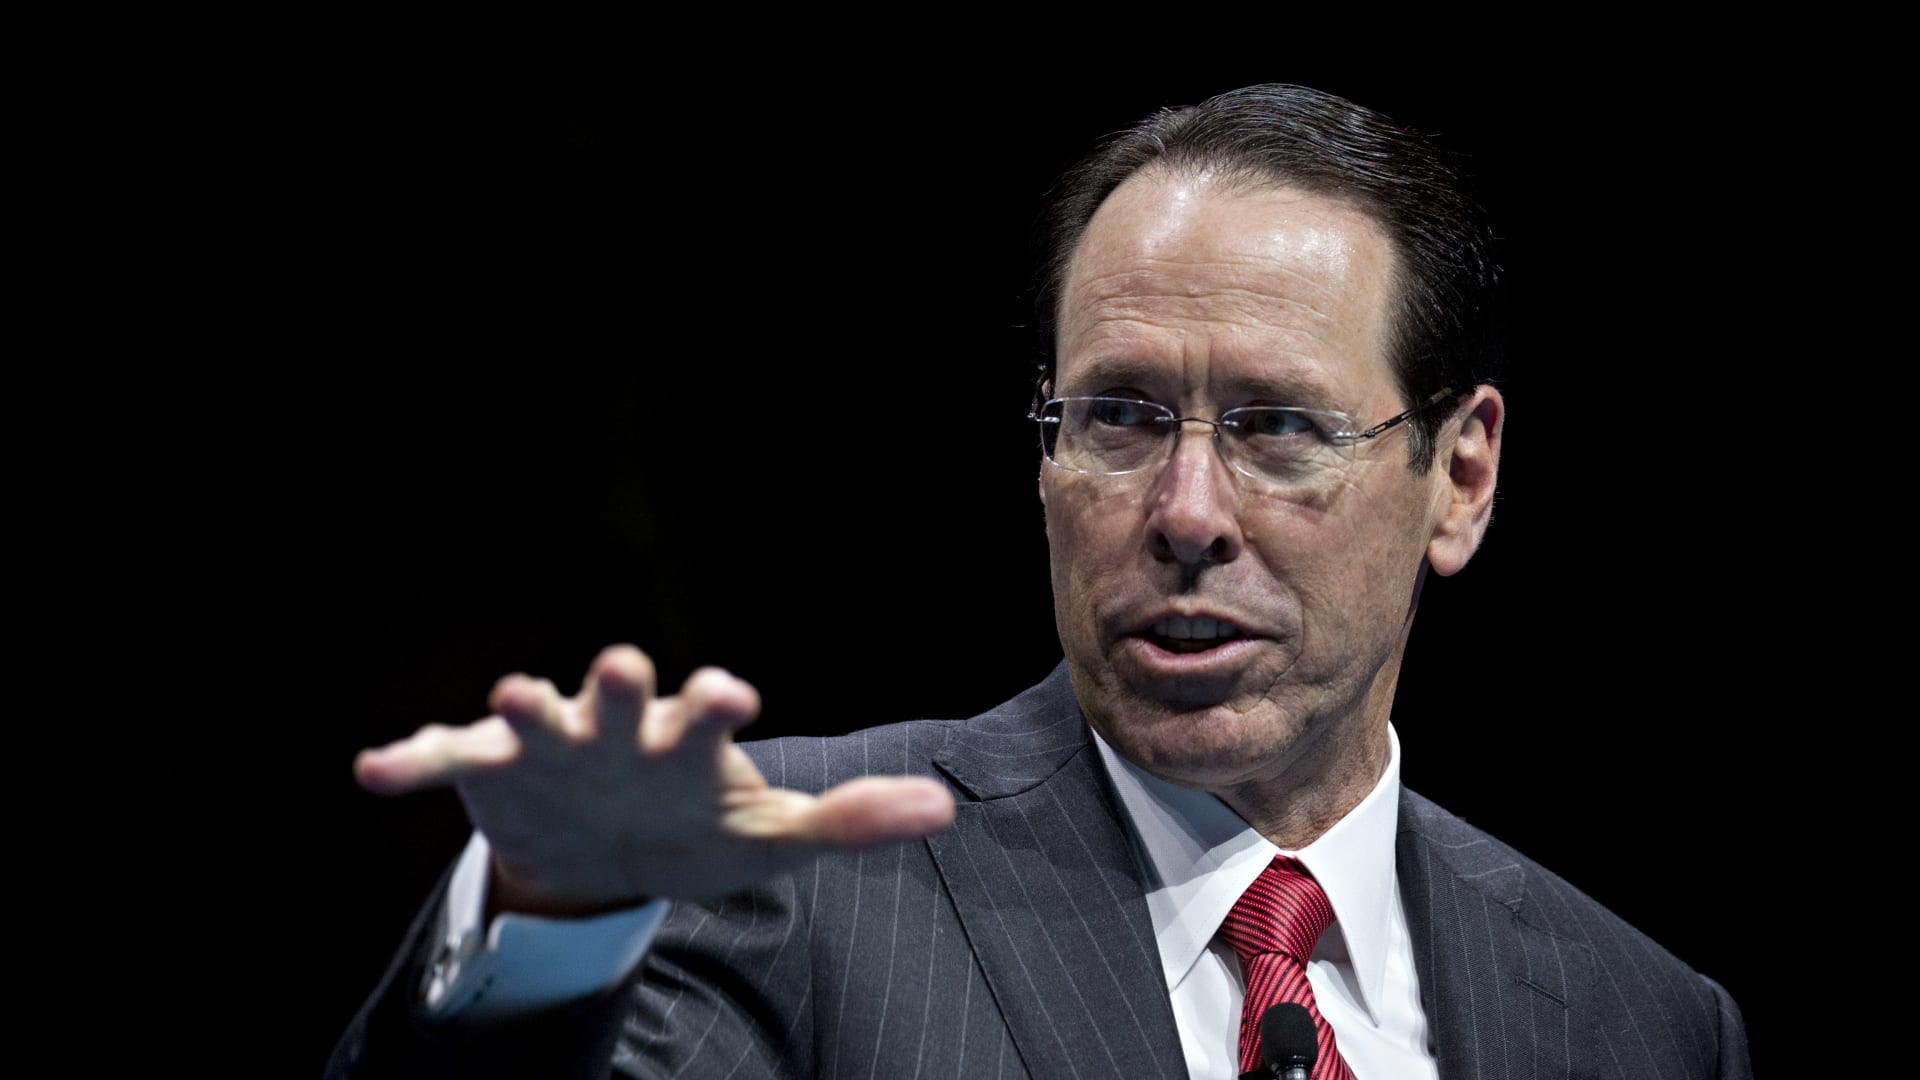 AT&T's Randall Stephenson calls on fellow CEOs to speak up for justice after George Floyd killing